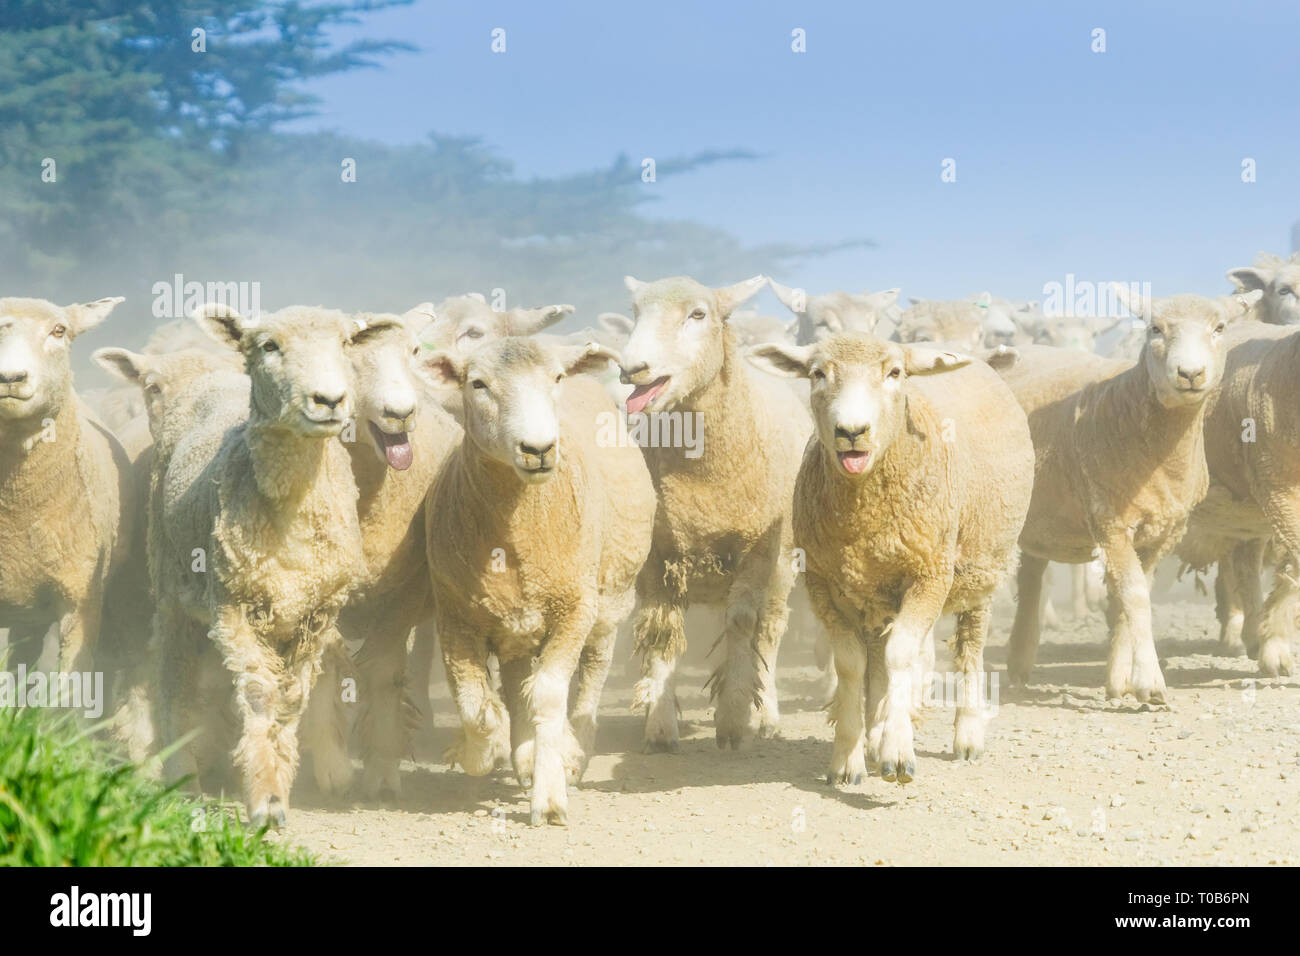 MOERAKI NEW ZEALAND - OCTOBER 23 2018; Through dust and haze kicked up by flock of sheep being moved along country road. Stock Photo